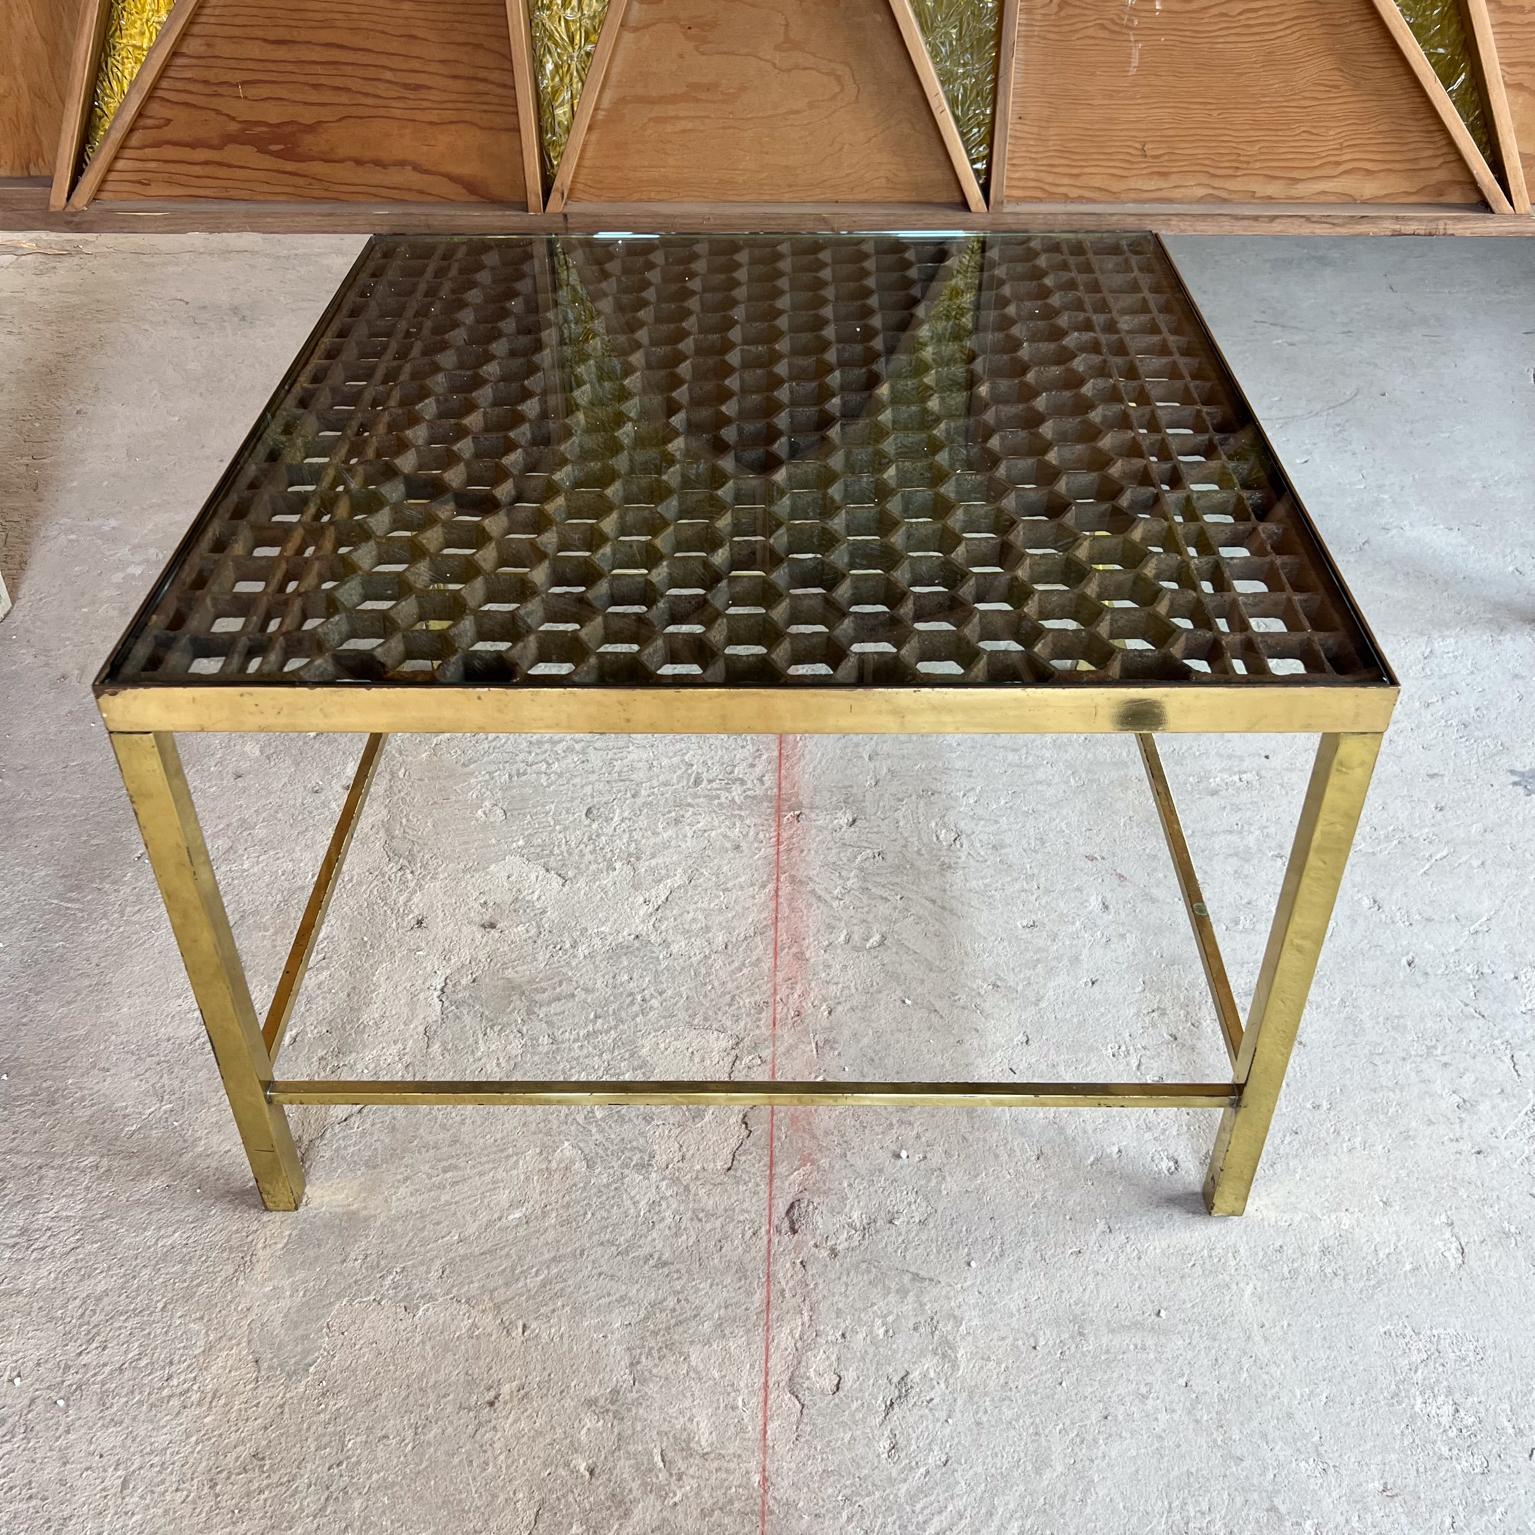 1960s Sensational Custom Side Table Brass and Iron grate
19 h X 28.63 x 28.63
Original preowned vintage unrestored.
Expect vintage discoloration.
Refer to all images provided.